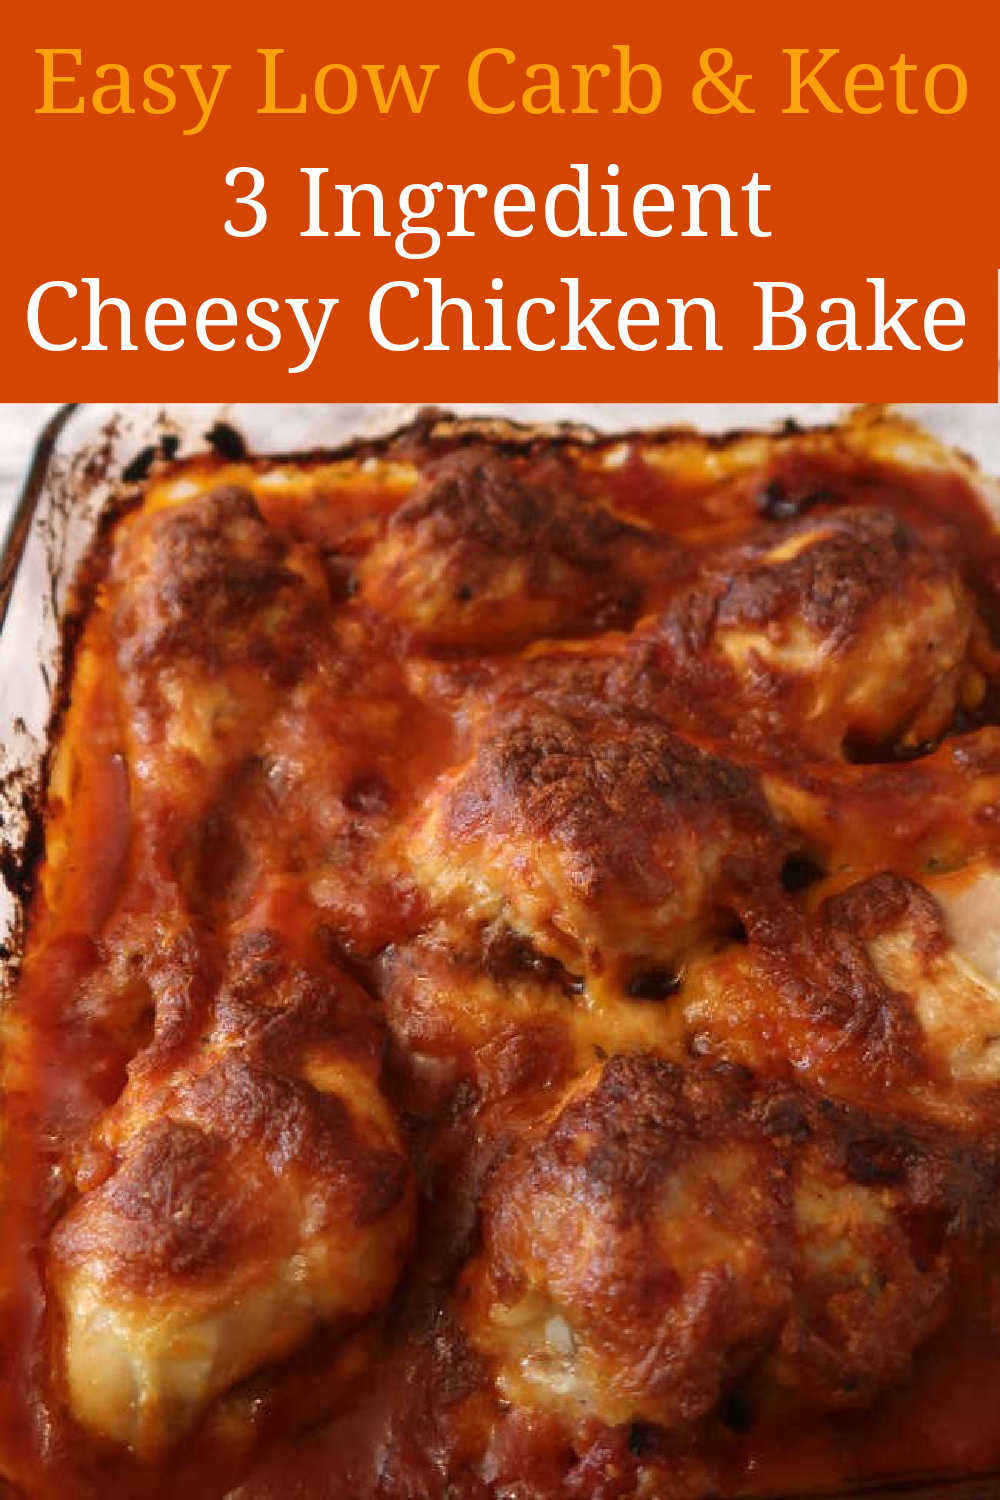 Cheesy Chicken Bake Recipe - How to make the best quick and cheap 3 ingredient chicken baked casserole dinner idea with cheese that's low carb and keto diet friendly - with the video tutorial.